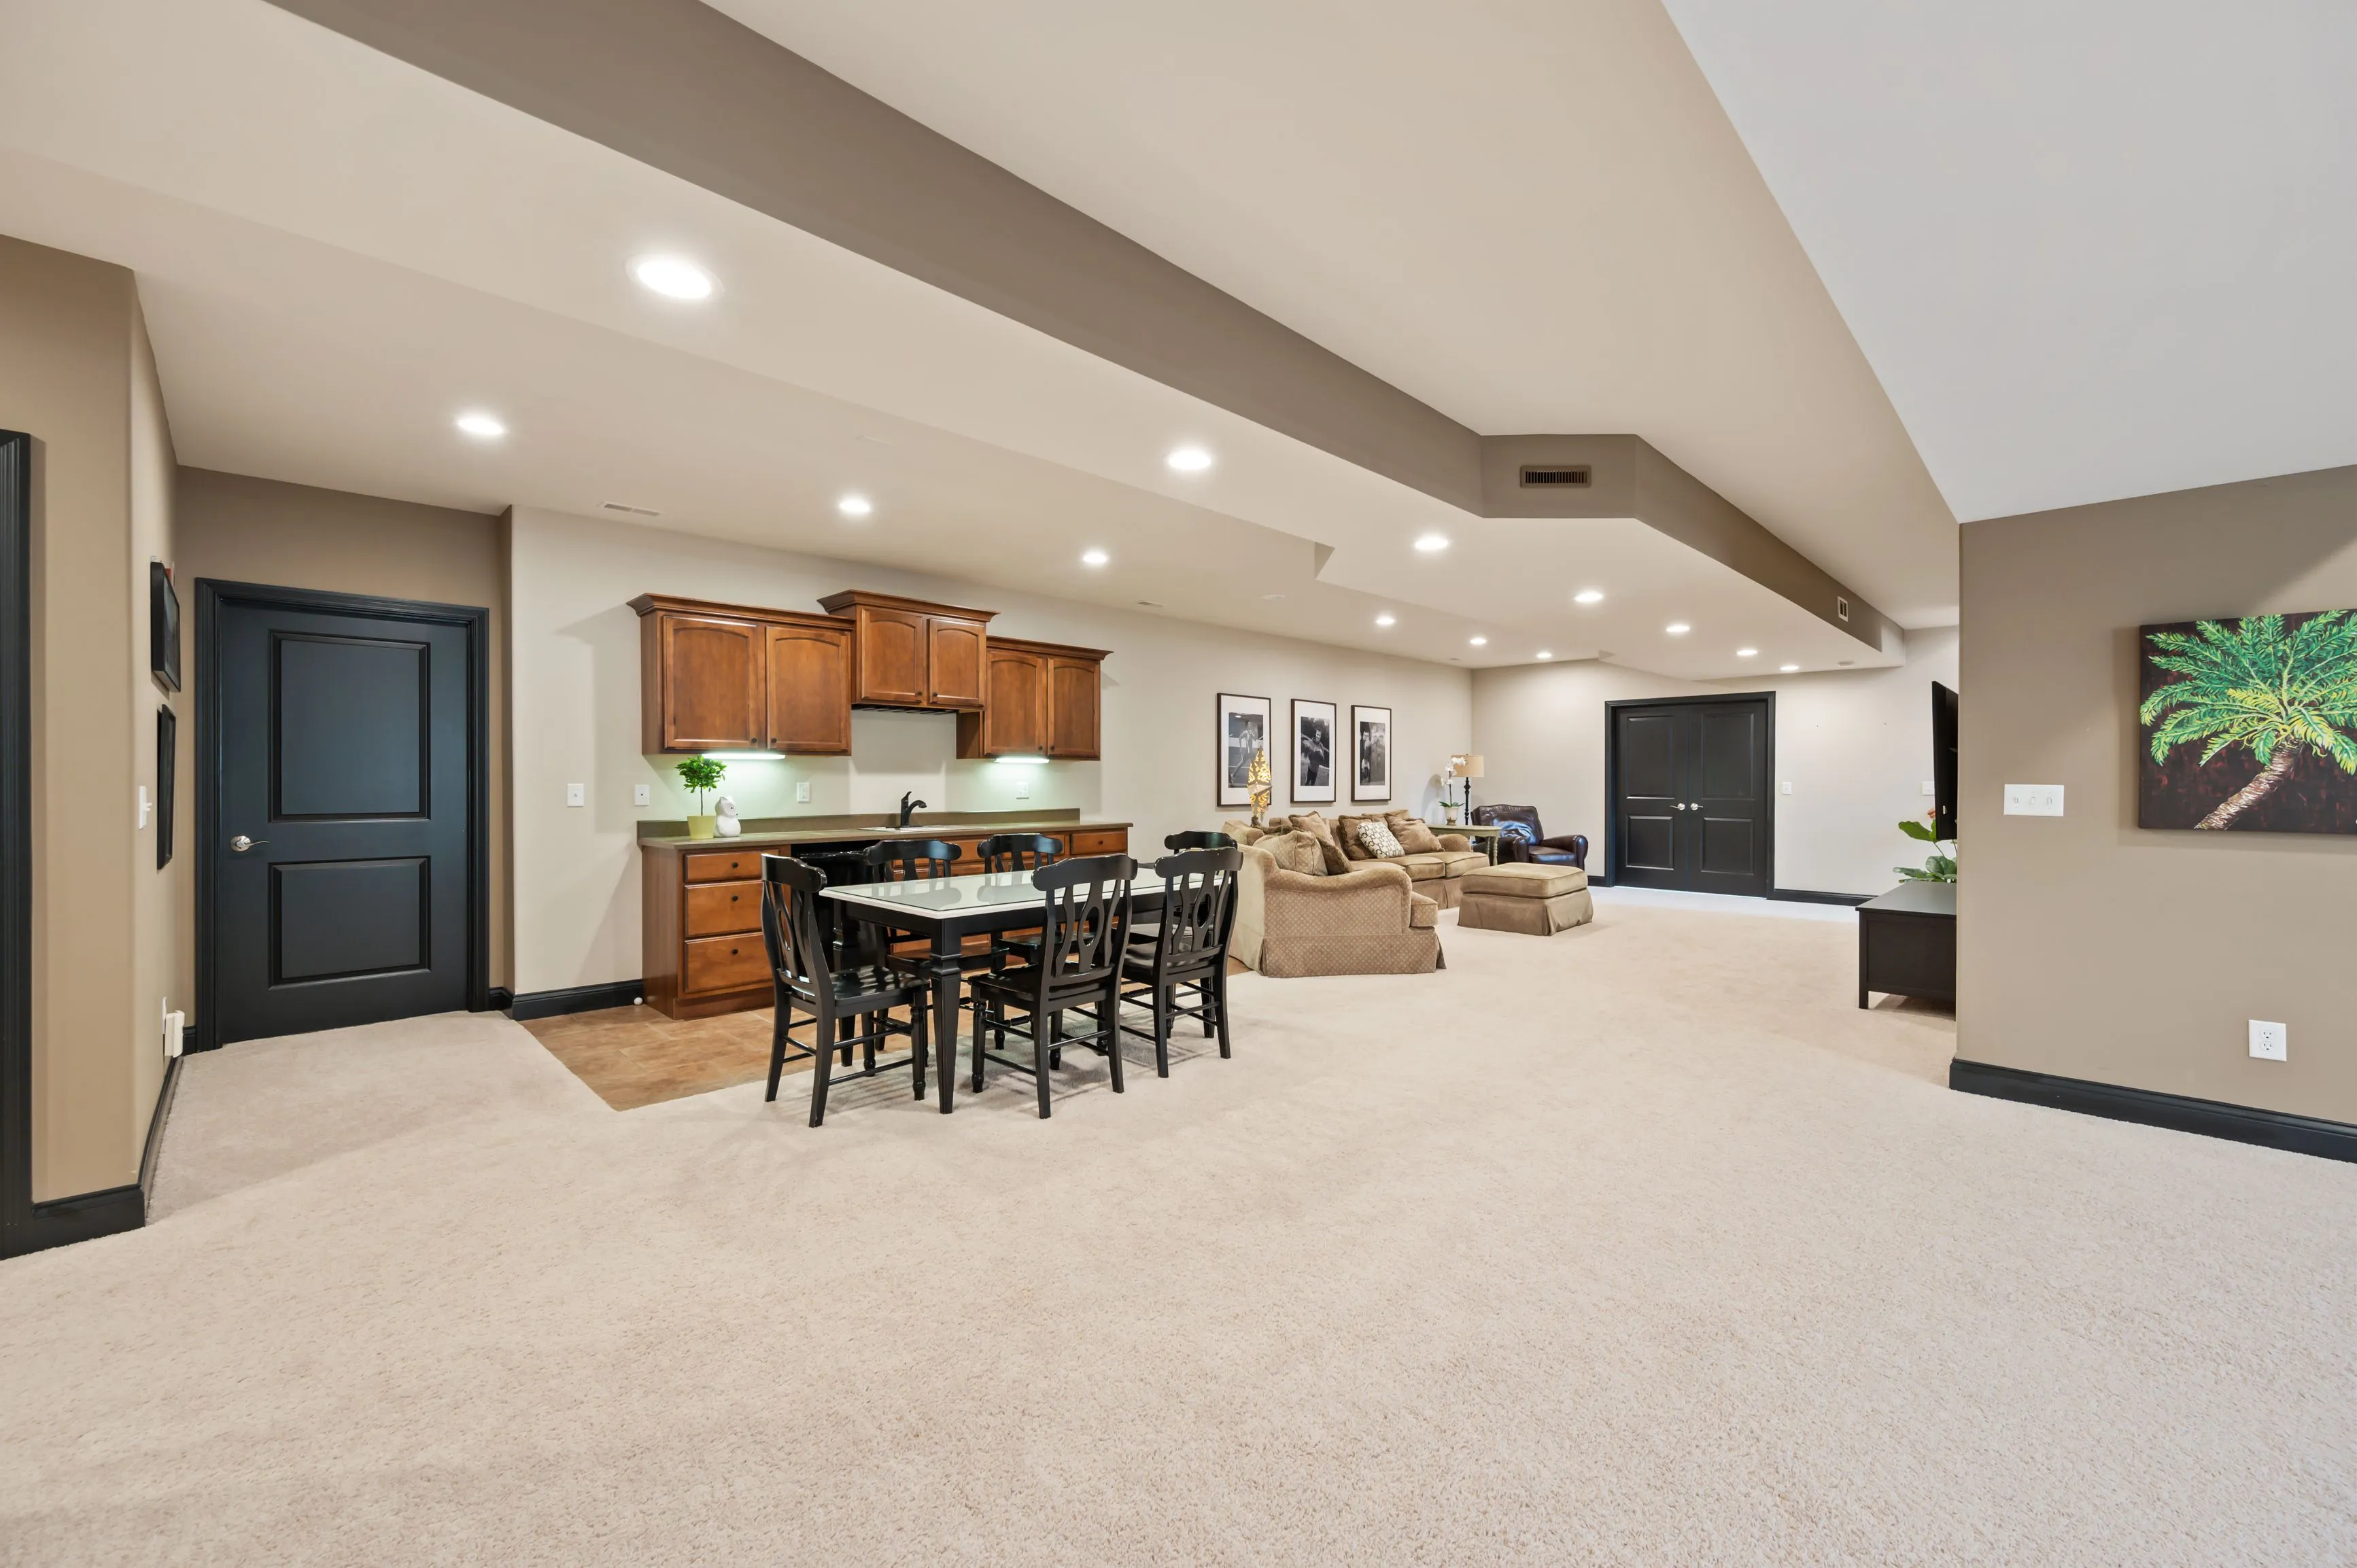 Spacious modern open concept living area with kitchen, dining space, and living room, featuring hardwood floors, recessed lighting, and contemporary furnishings.